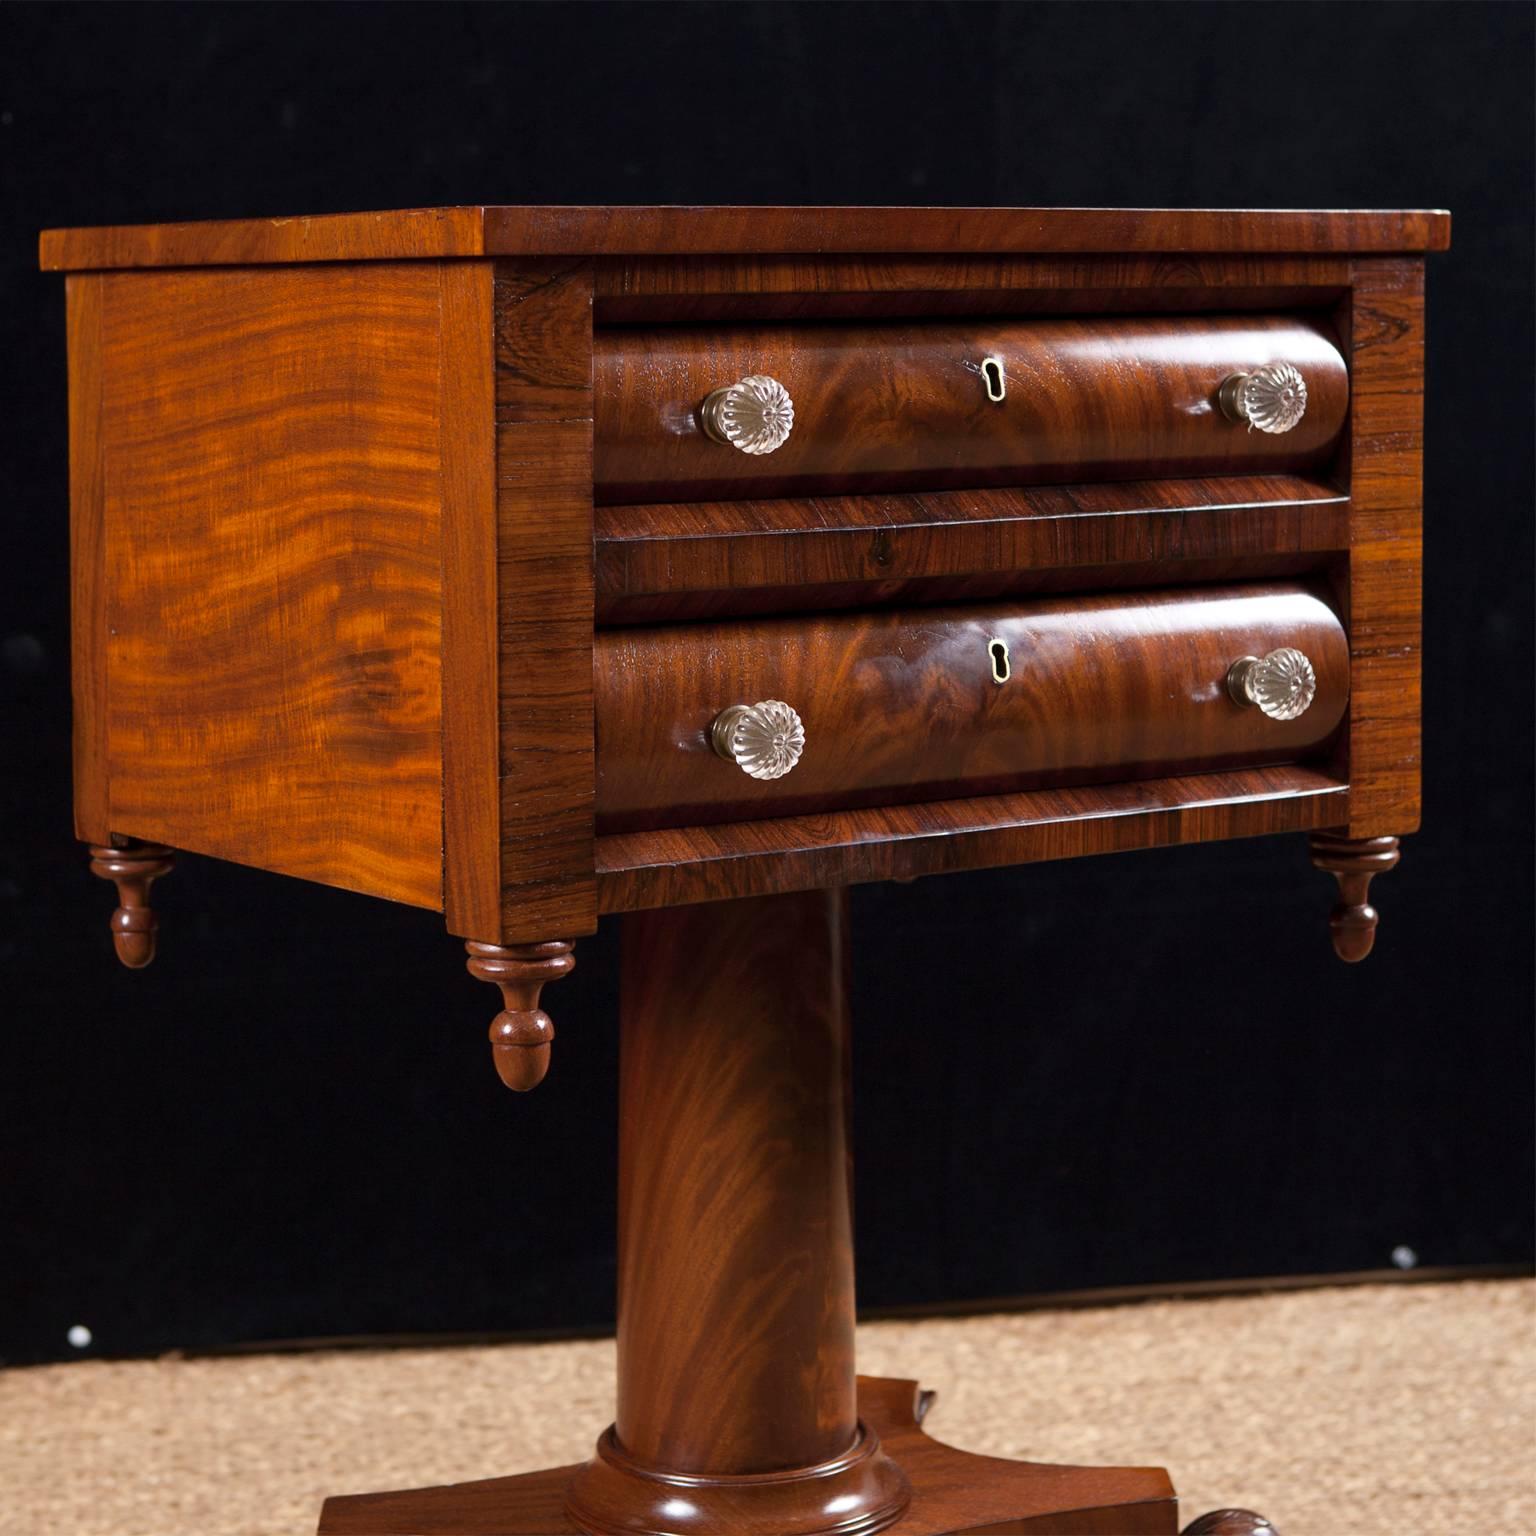 A neoclassical American Empire work table in mahogany and crotch mahogany with two drawers with convex fronts. Top rests on cylindrical column over a quatre-from base and terminating in carved lions' paw feet on casters, Philadelphia, circa